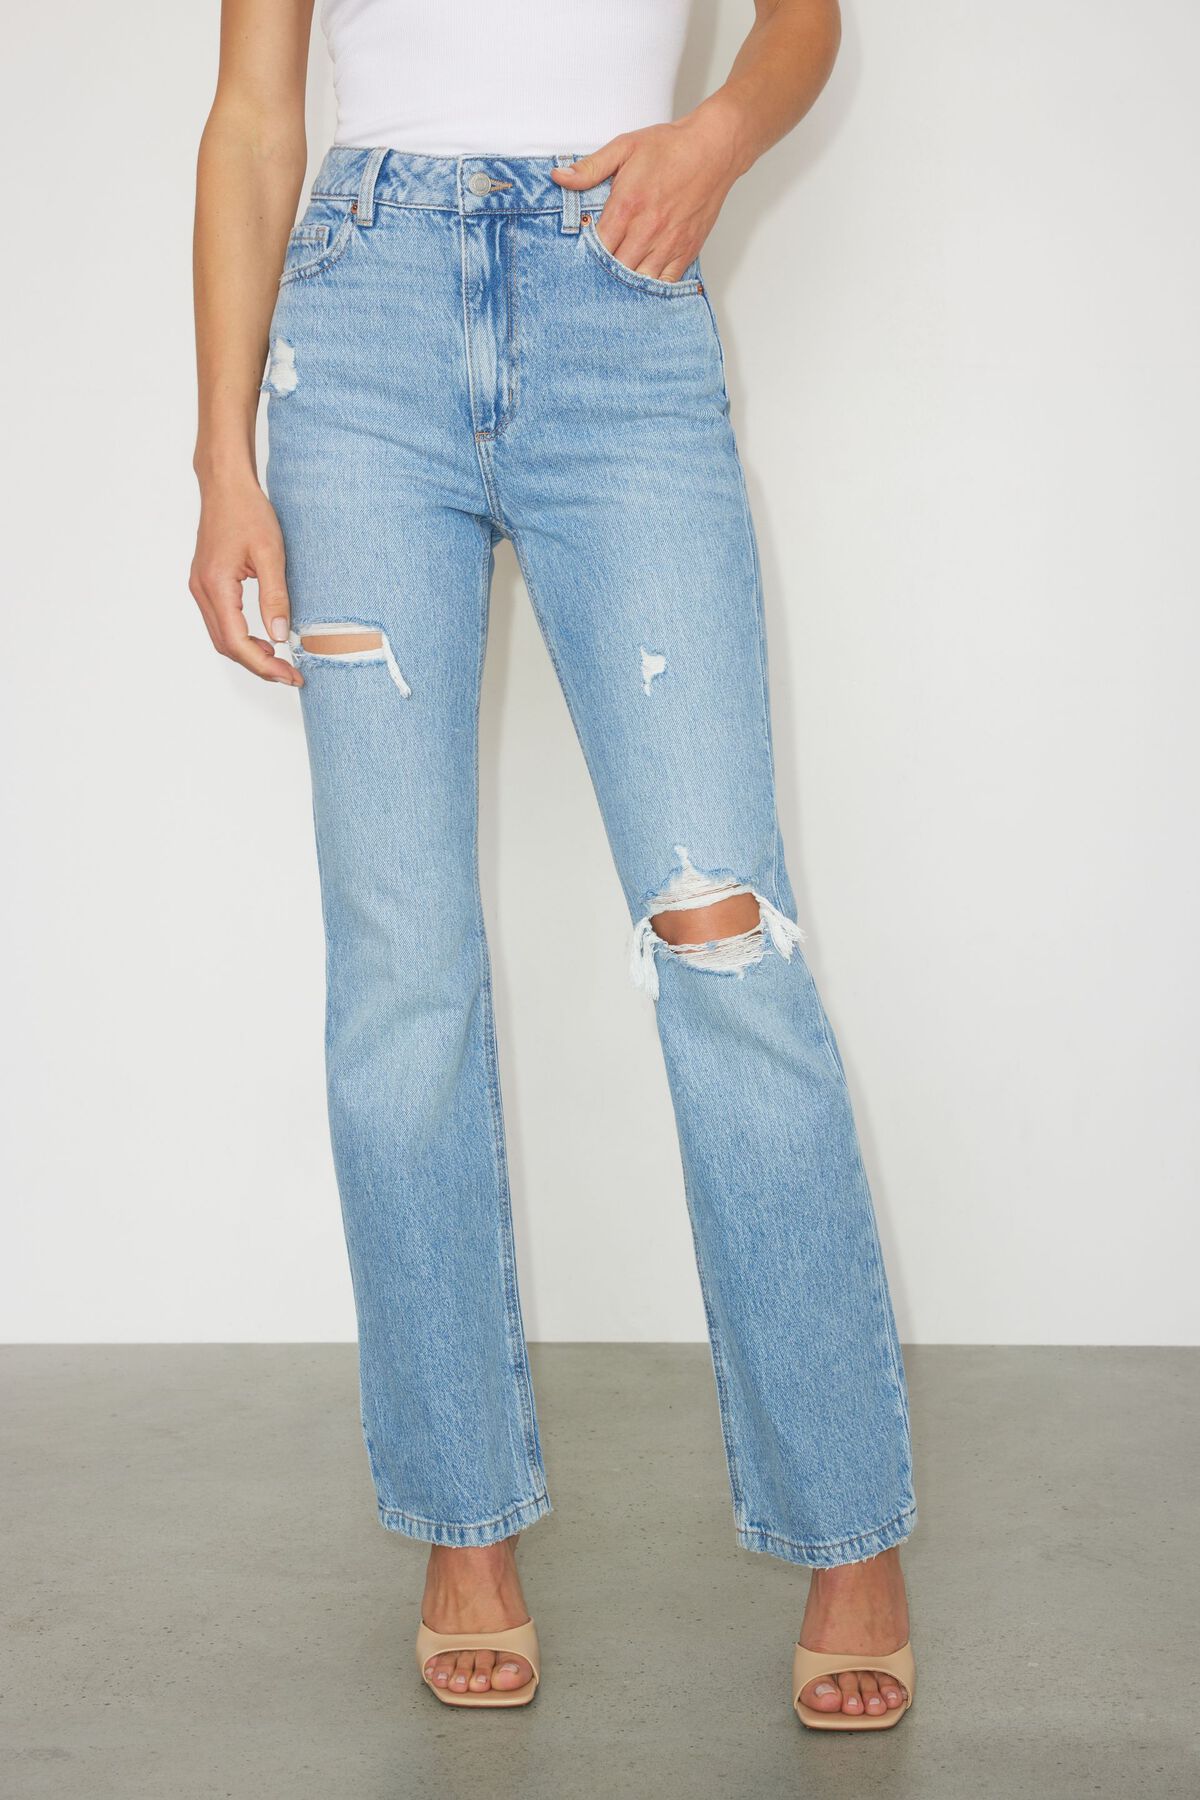 Dynamite Candice Distressed Bootcut Jeans. 2